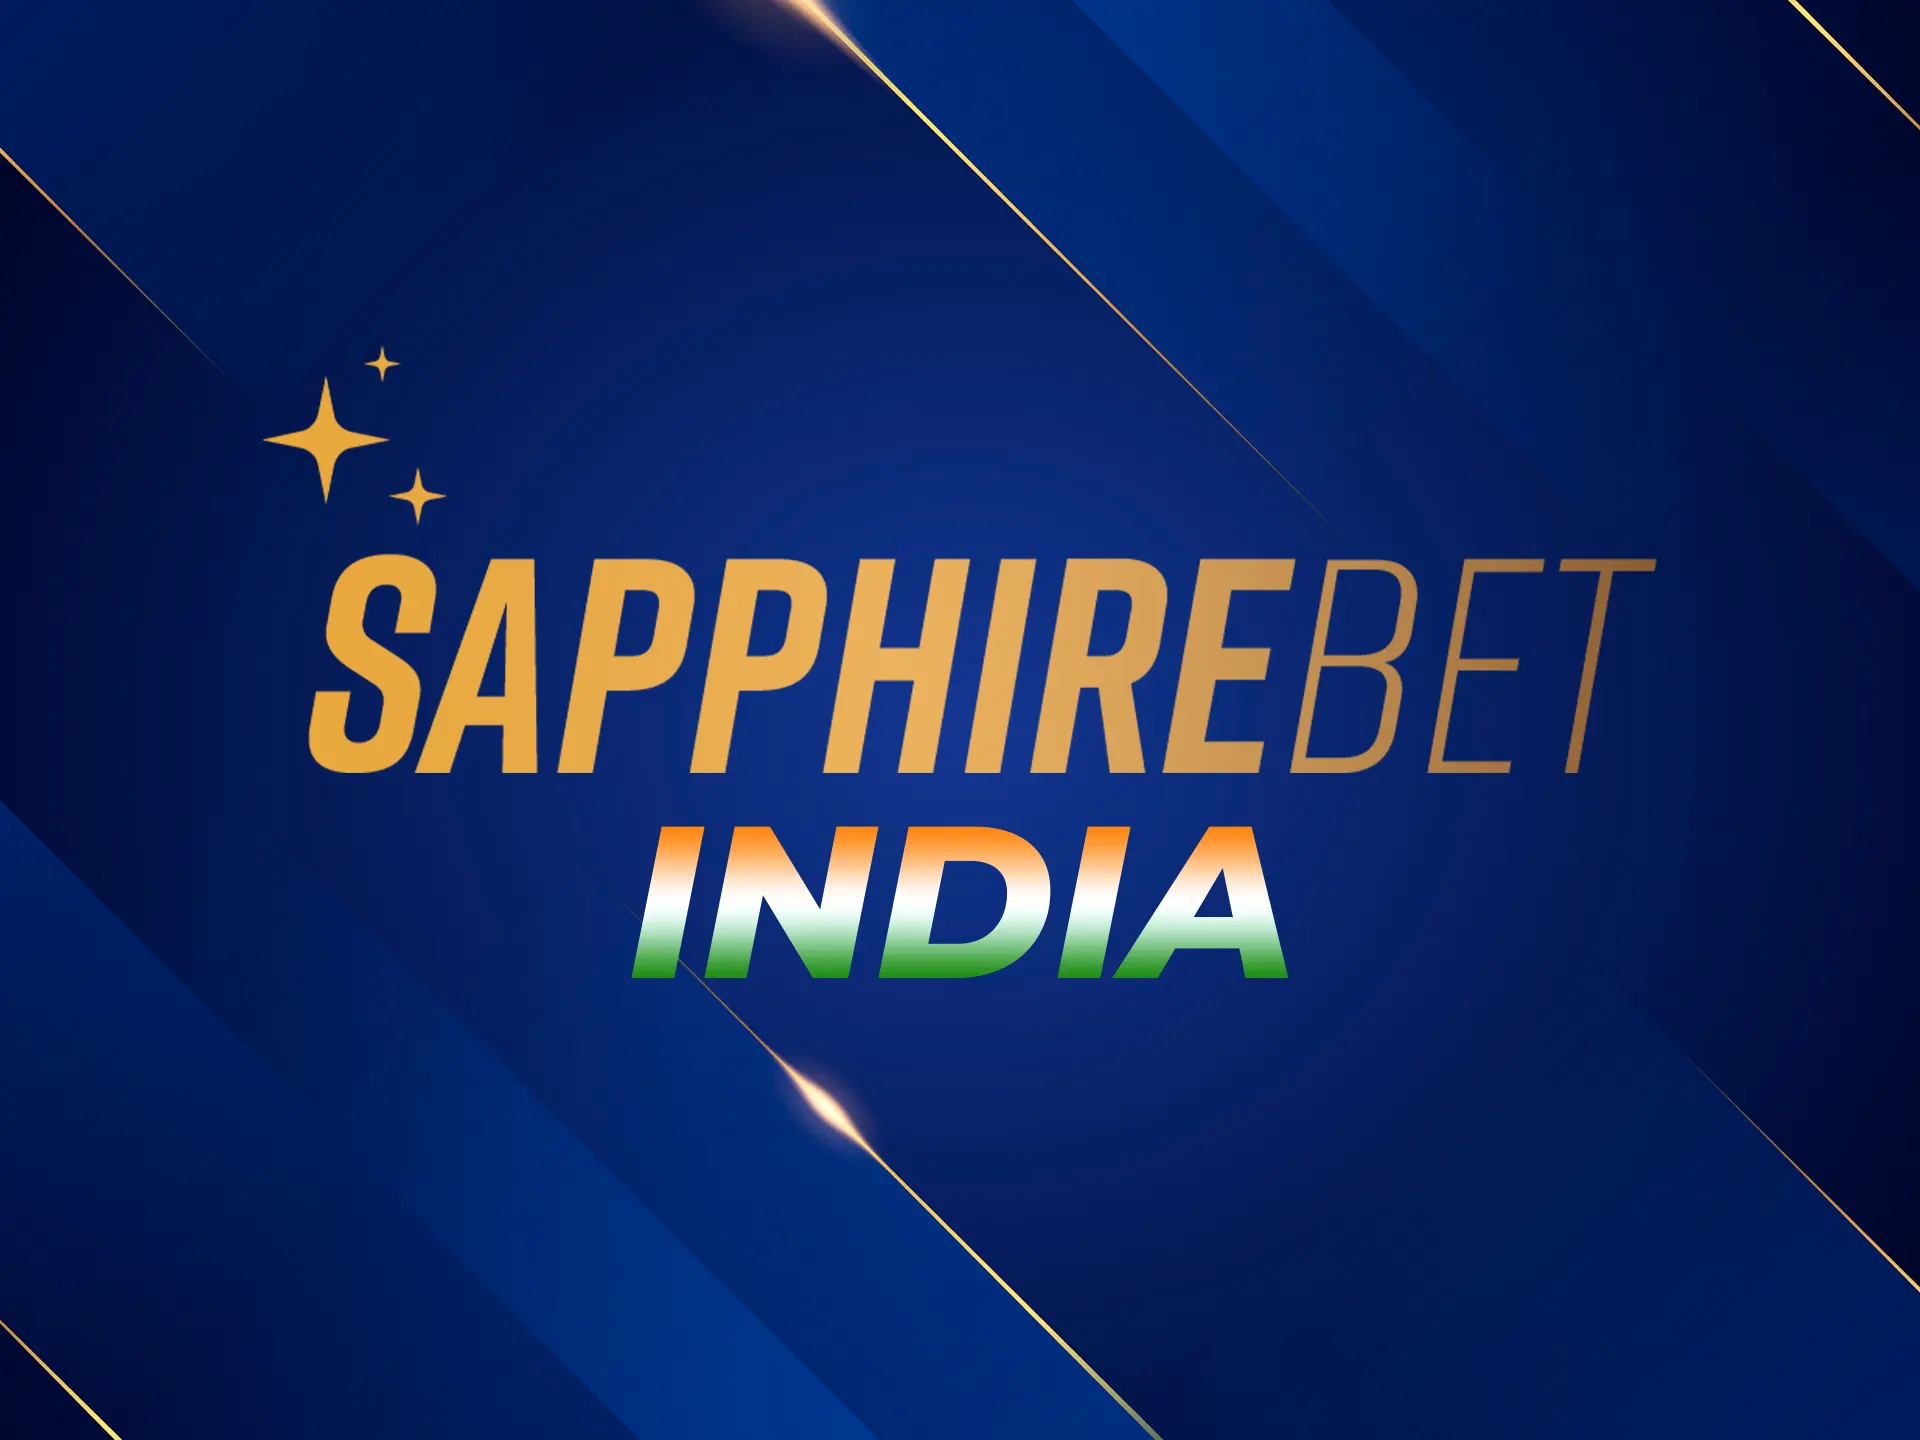 Sapphirebet is gaining popularity among Indian players and has been in the Indian market for over 5 years.